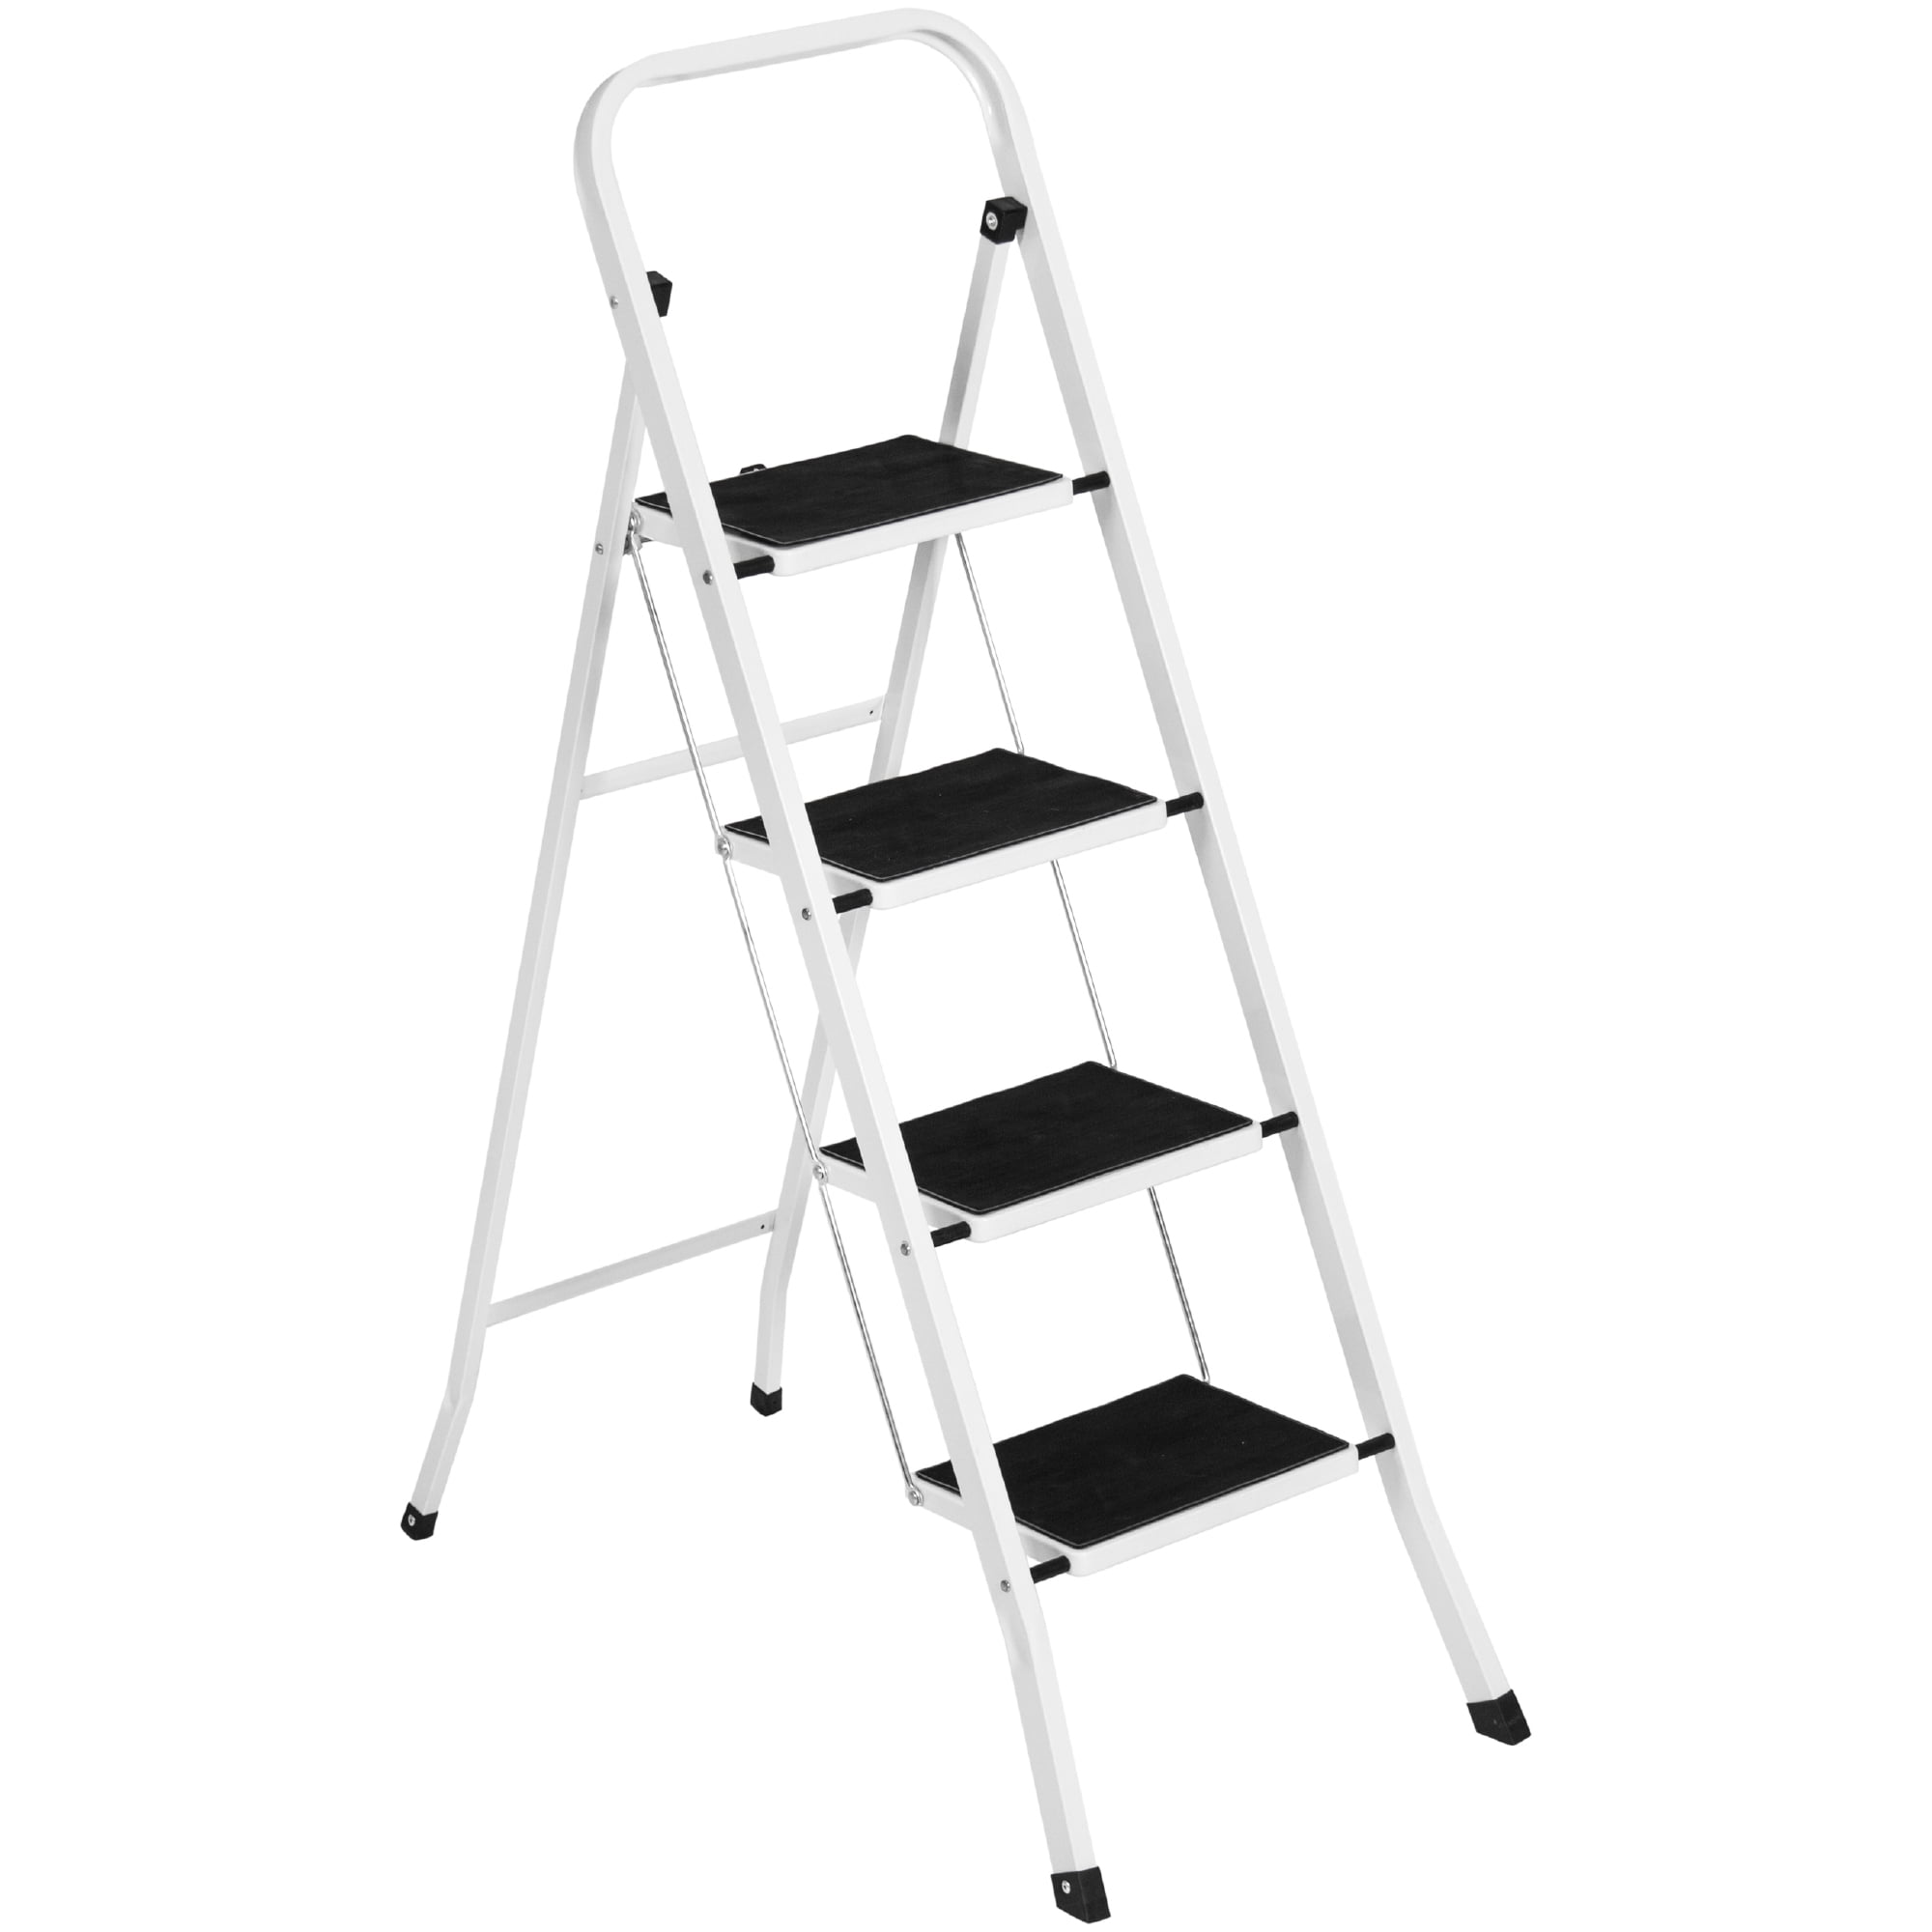 Details about   Protable 3-Step Ladder Folding Non-slip 330lbs Load Safety Tread Aluminum Ladder 